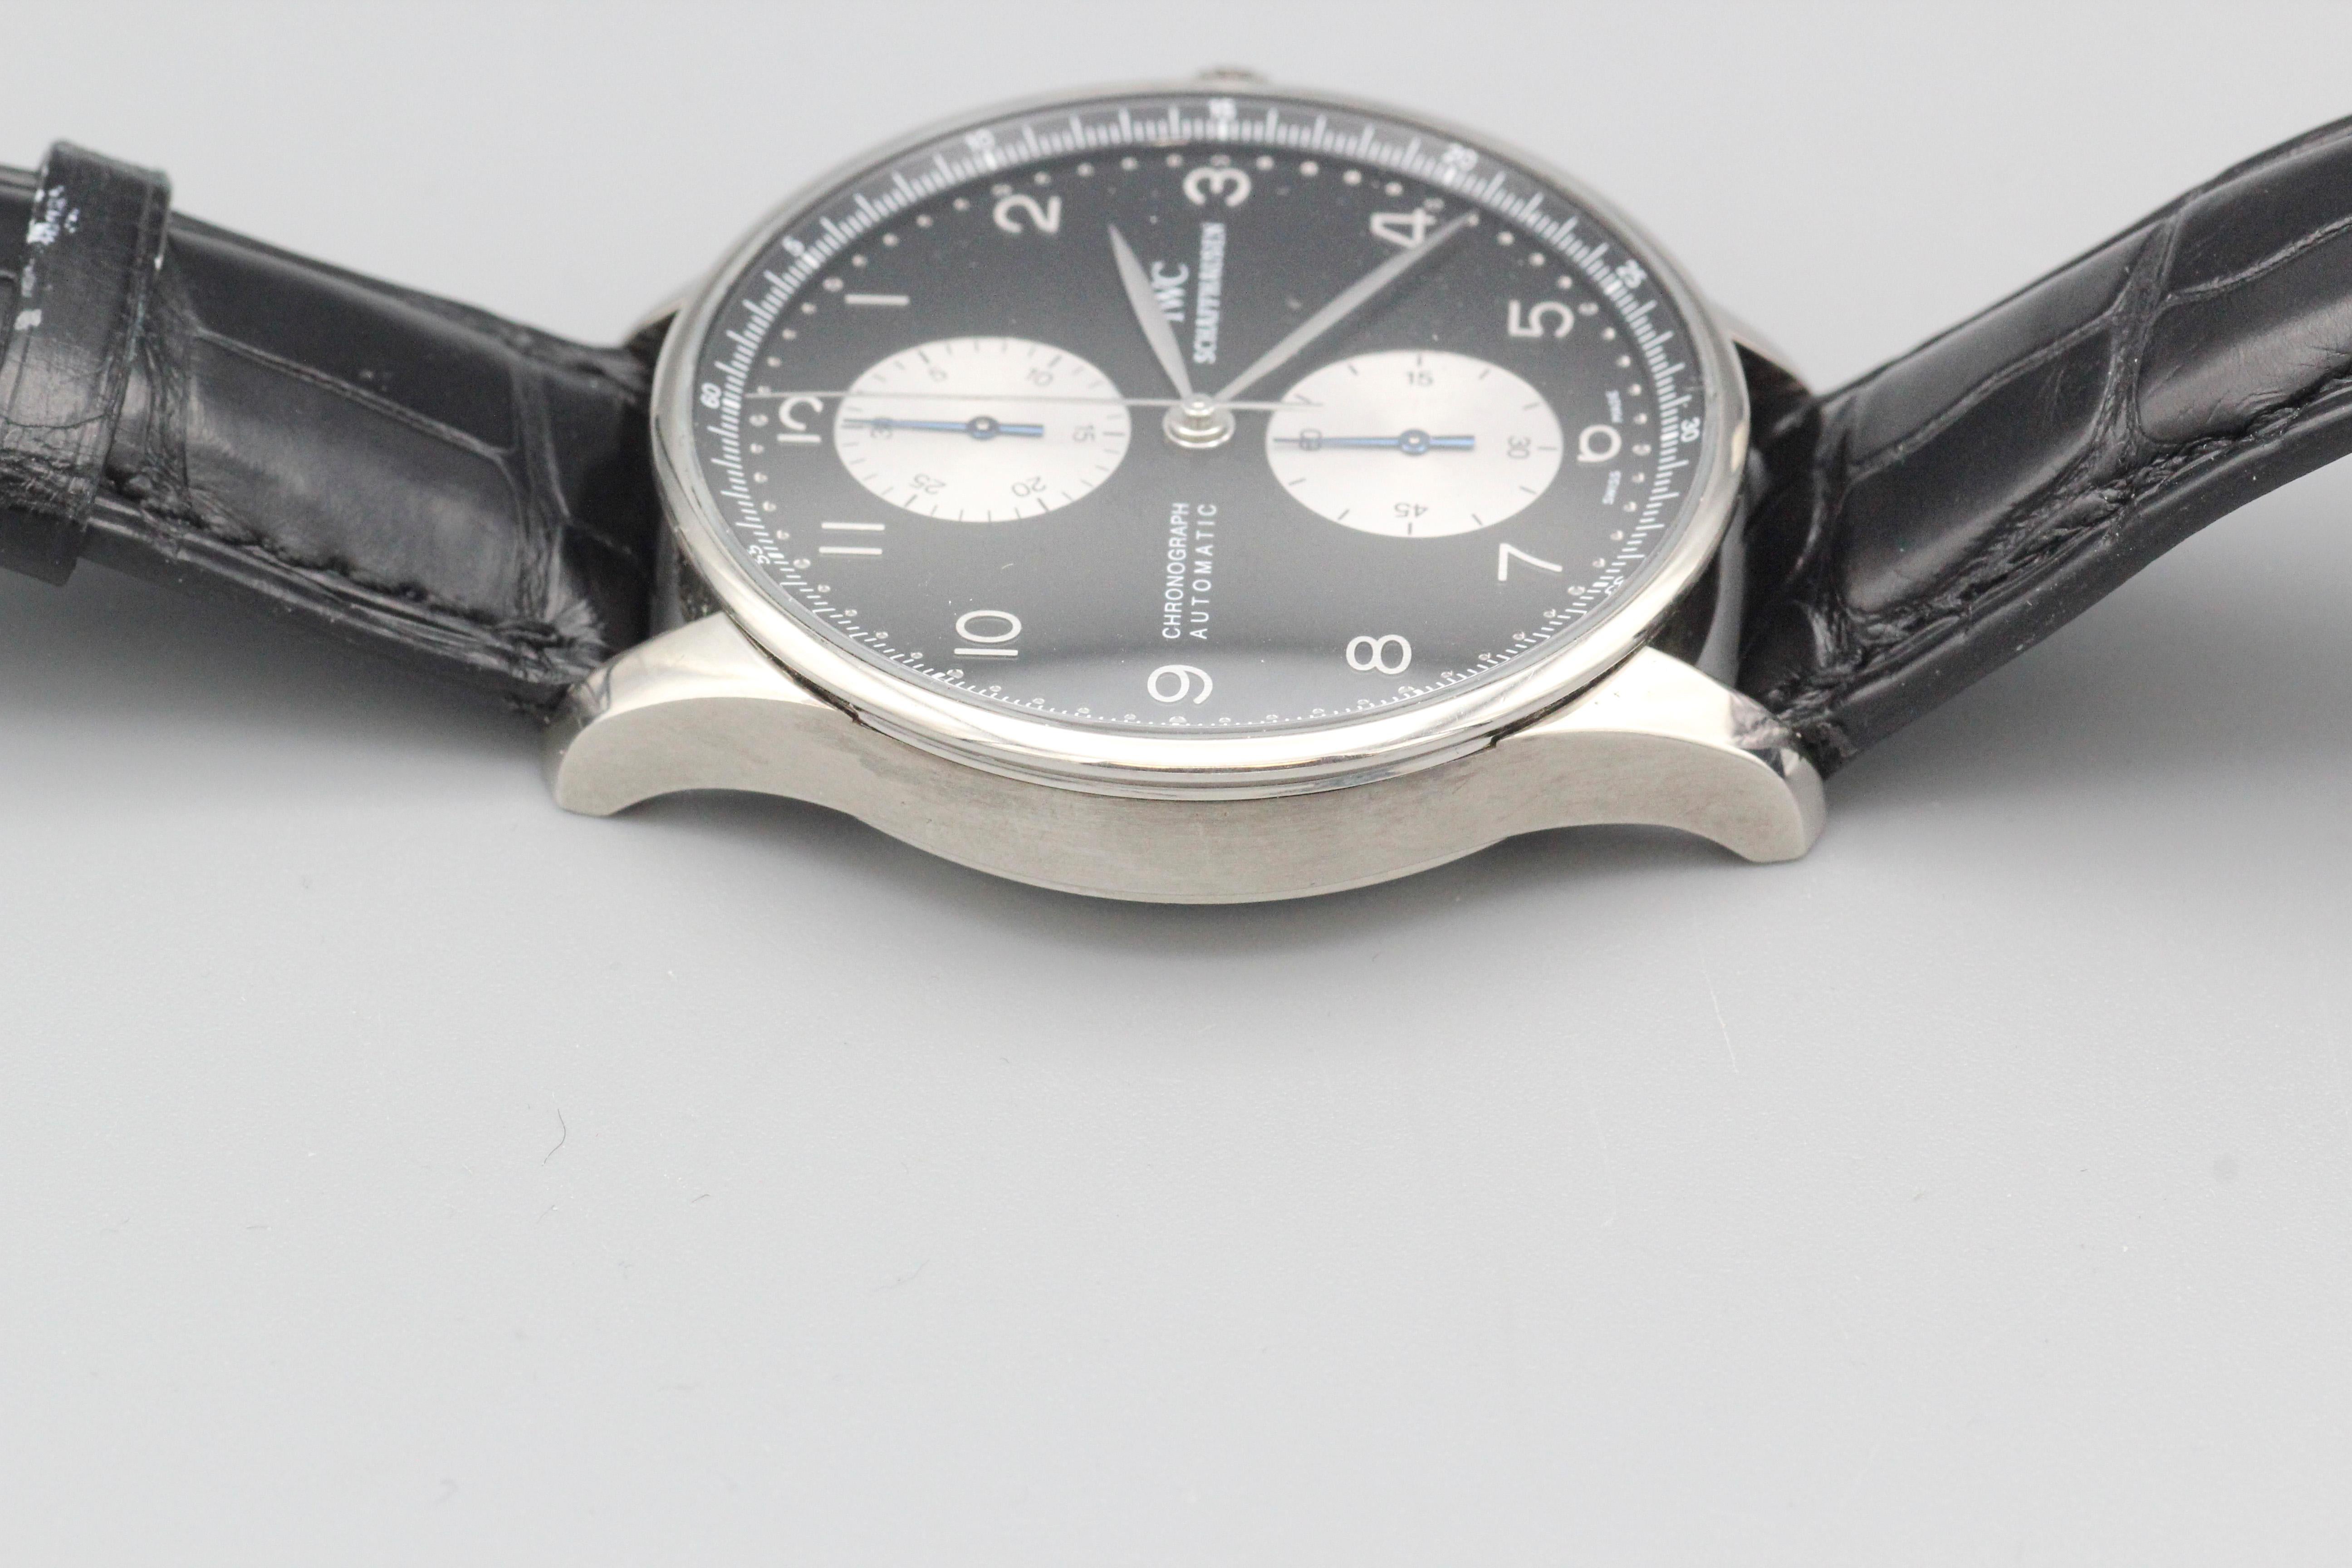 IWC Portugieser 18k White Gold Chronograph Wristwatch with rare Panda Dial For Sale 2